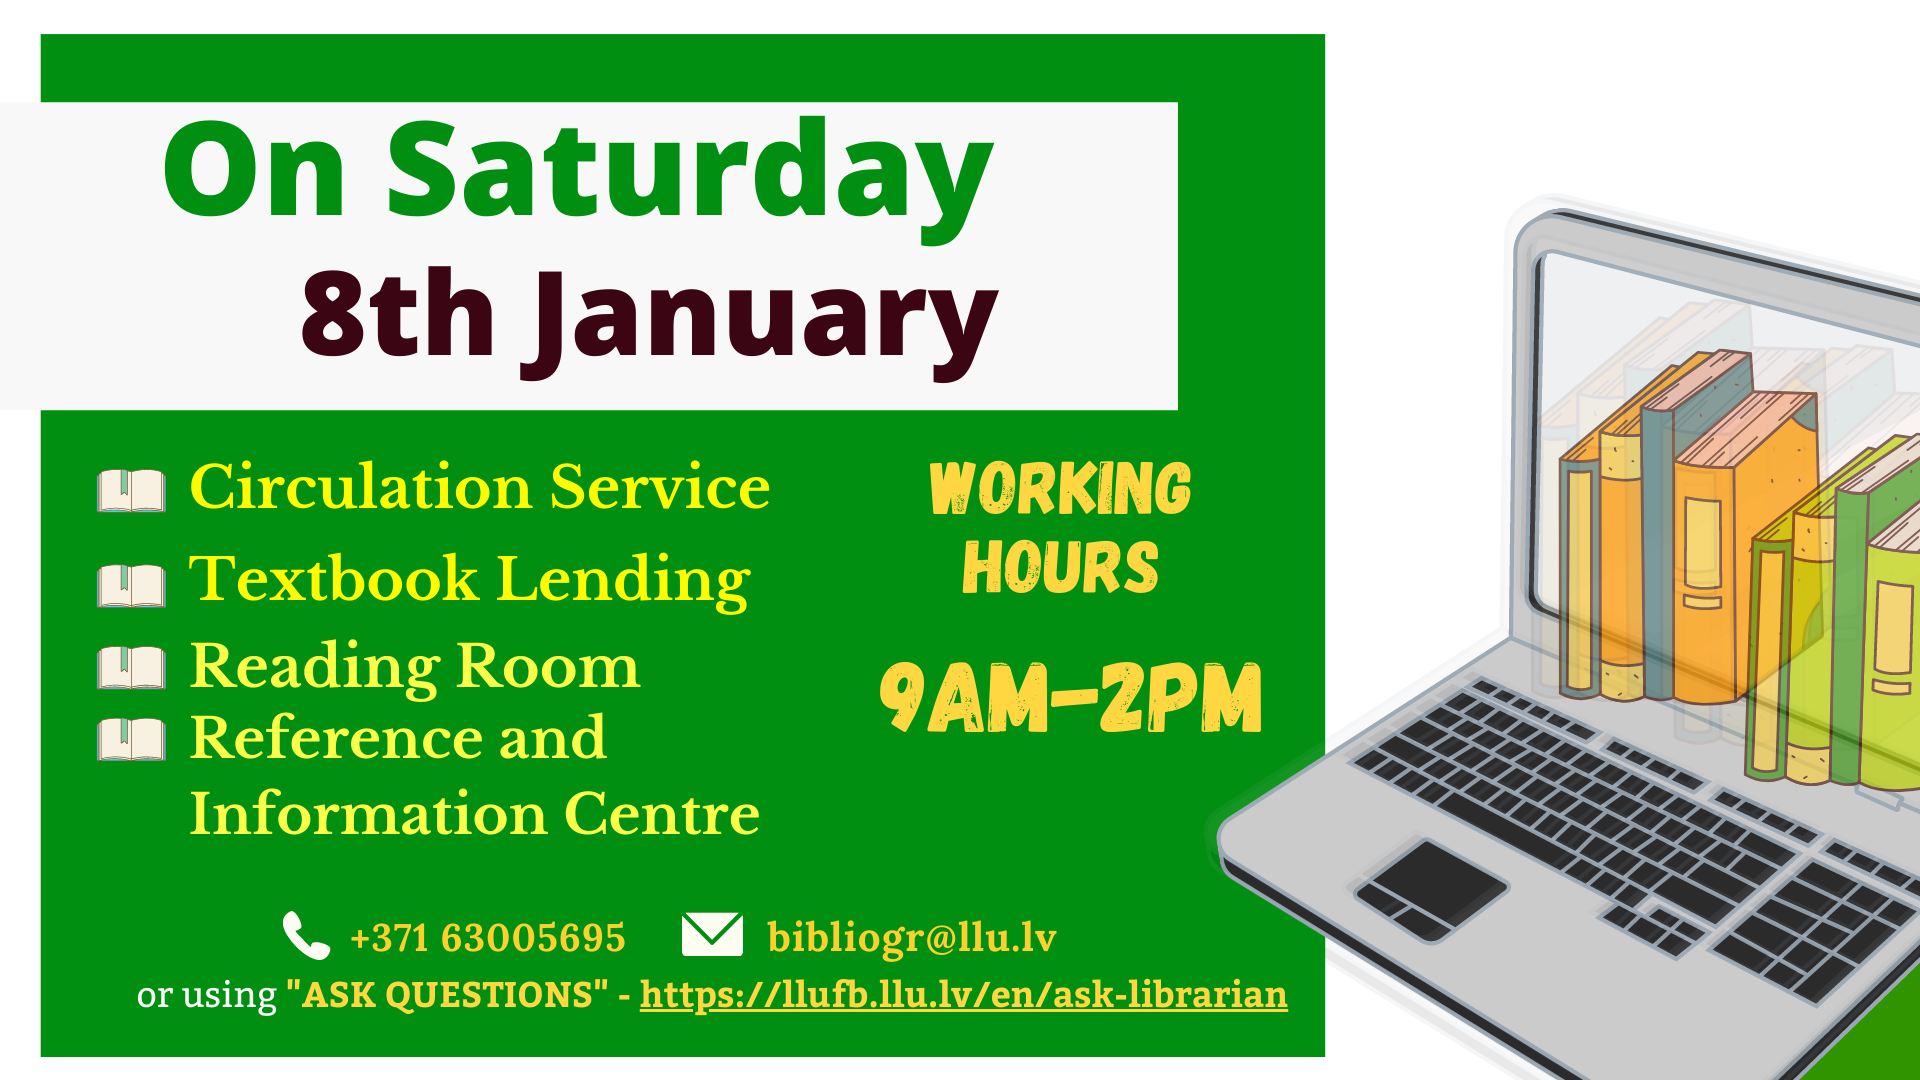 Library on Saturday 8 January working hours 9am-2pm.